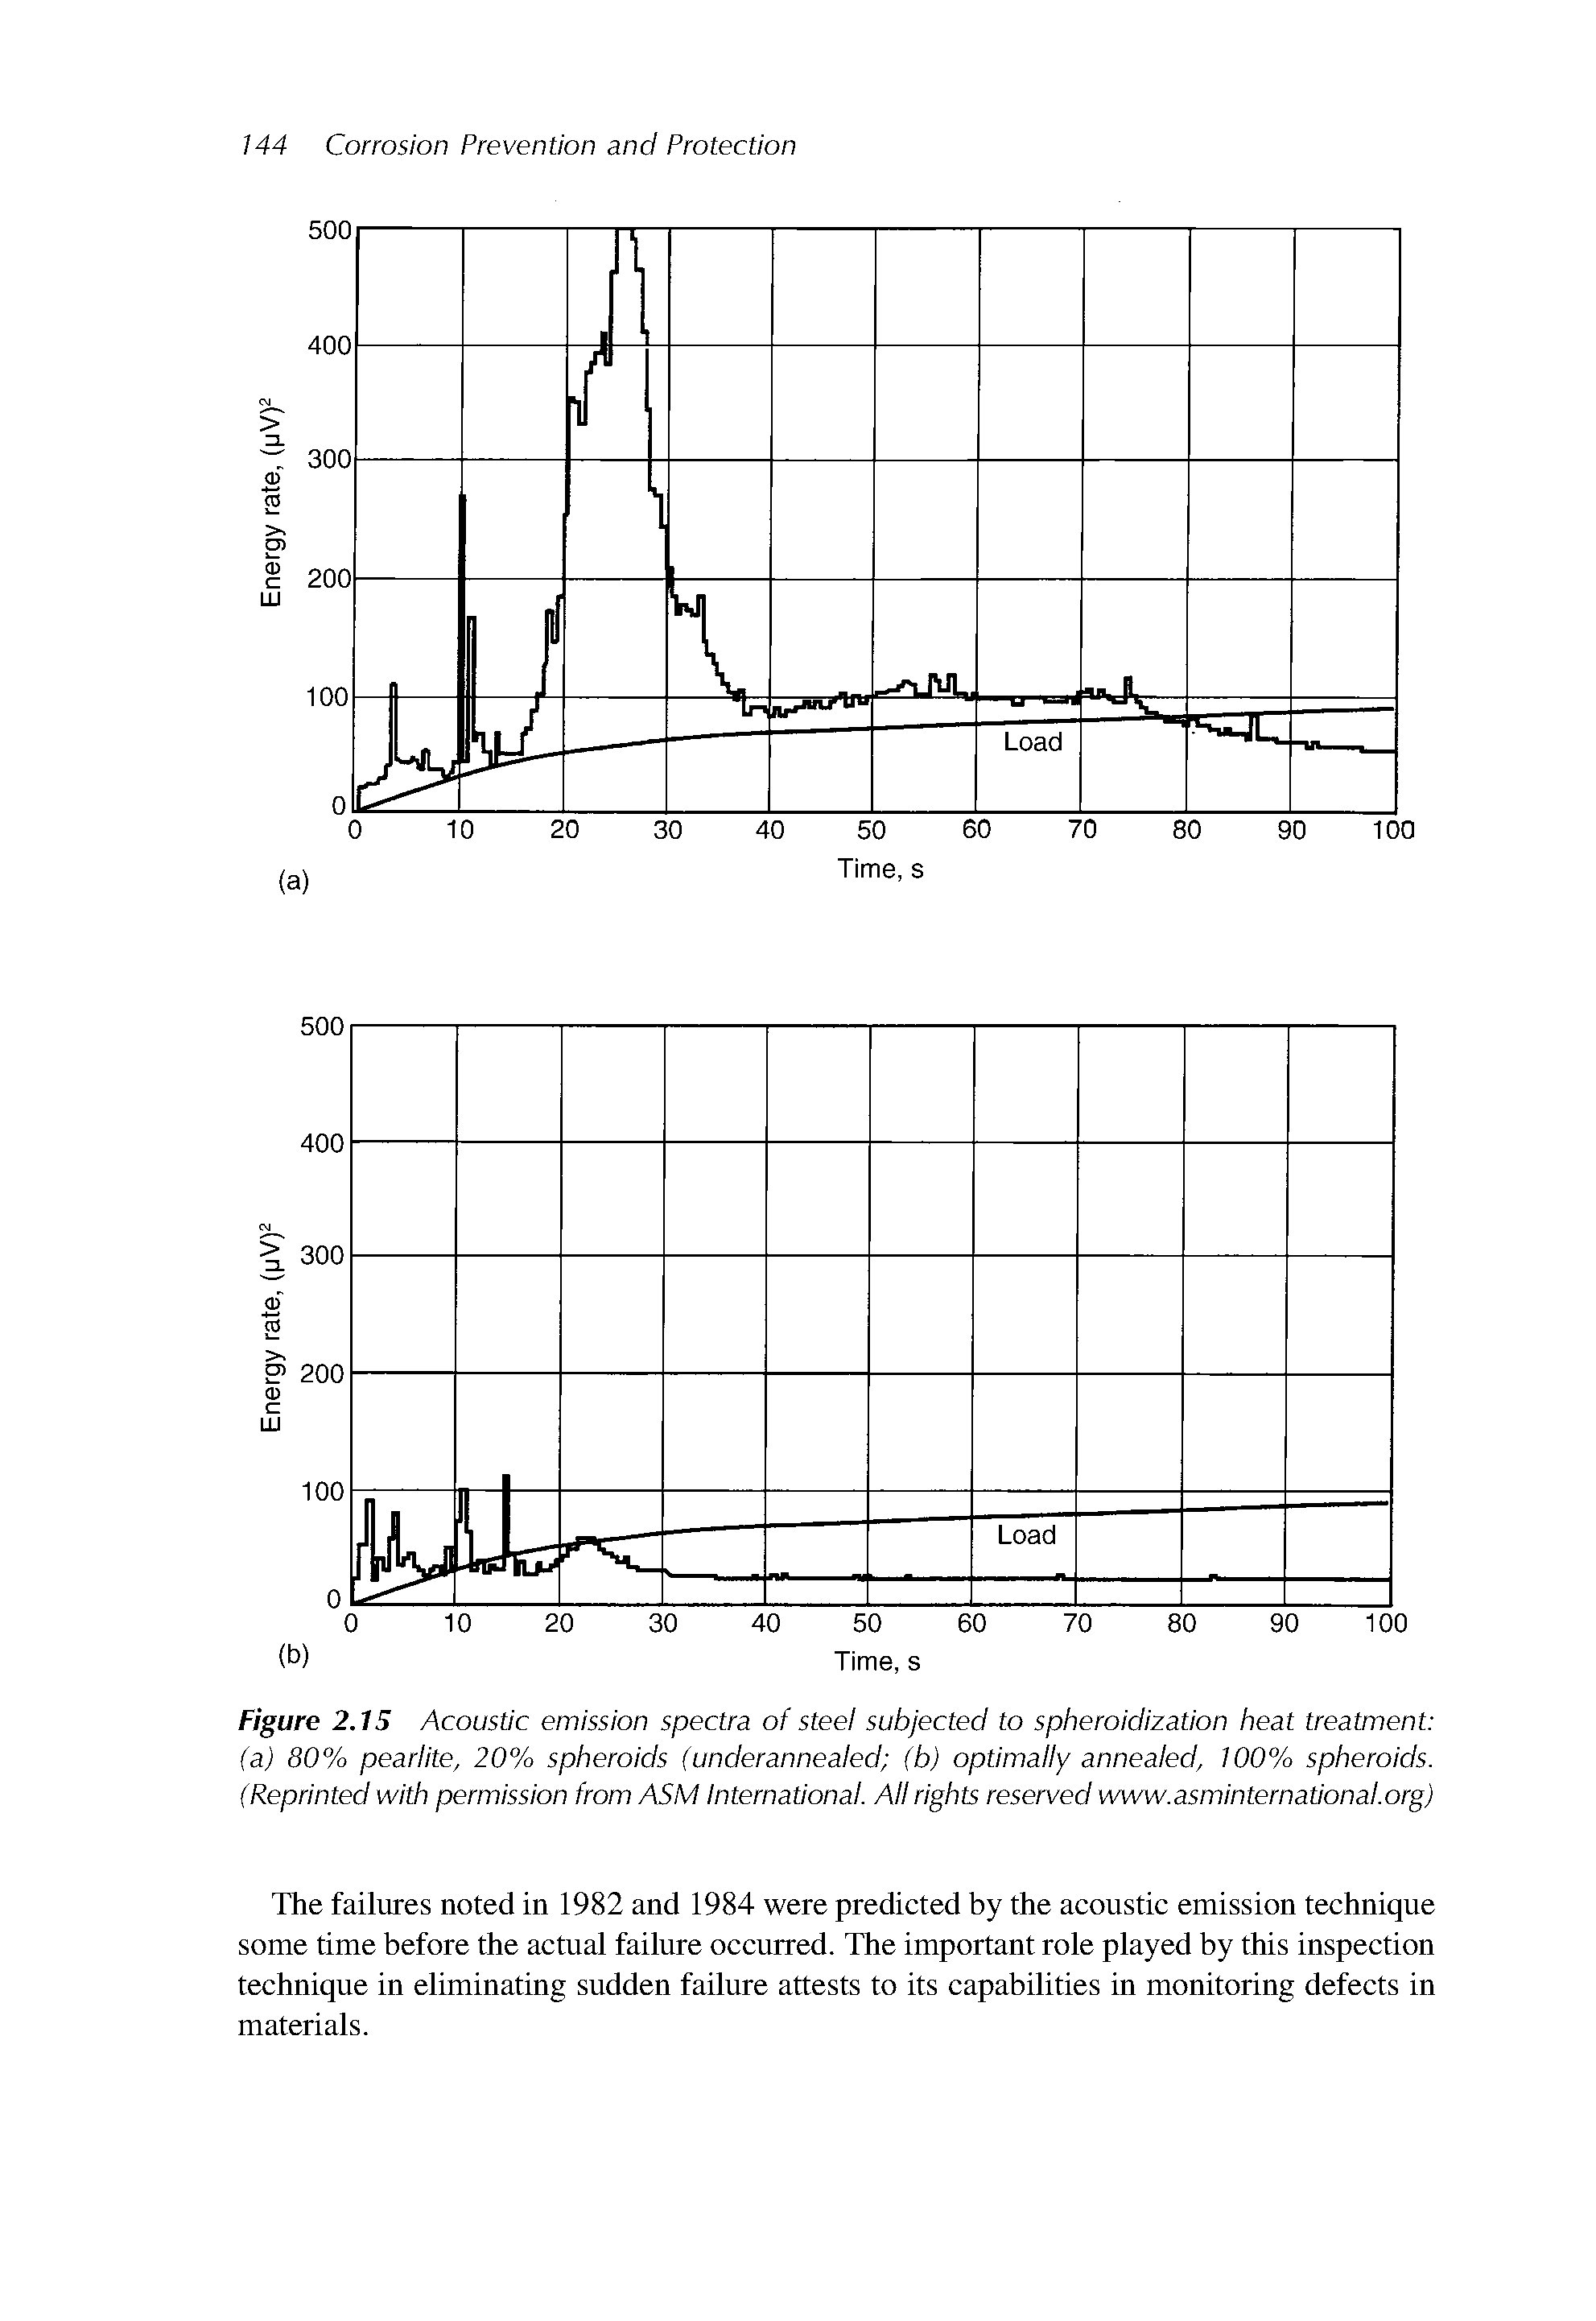 Figure 2.15 Acoustic emission spectra of steel subjected to spheroidization heat treatment (a) 80% pearlite, 20% spheroids (underannealed (b) optimally annealed, 100% spheroids. (Reprinted with permission from ASM International. All rights reserved www.asminternational.org)...